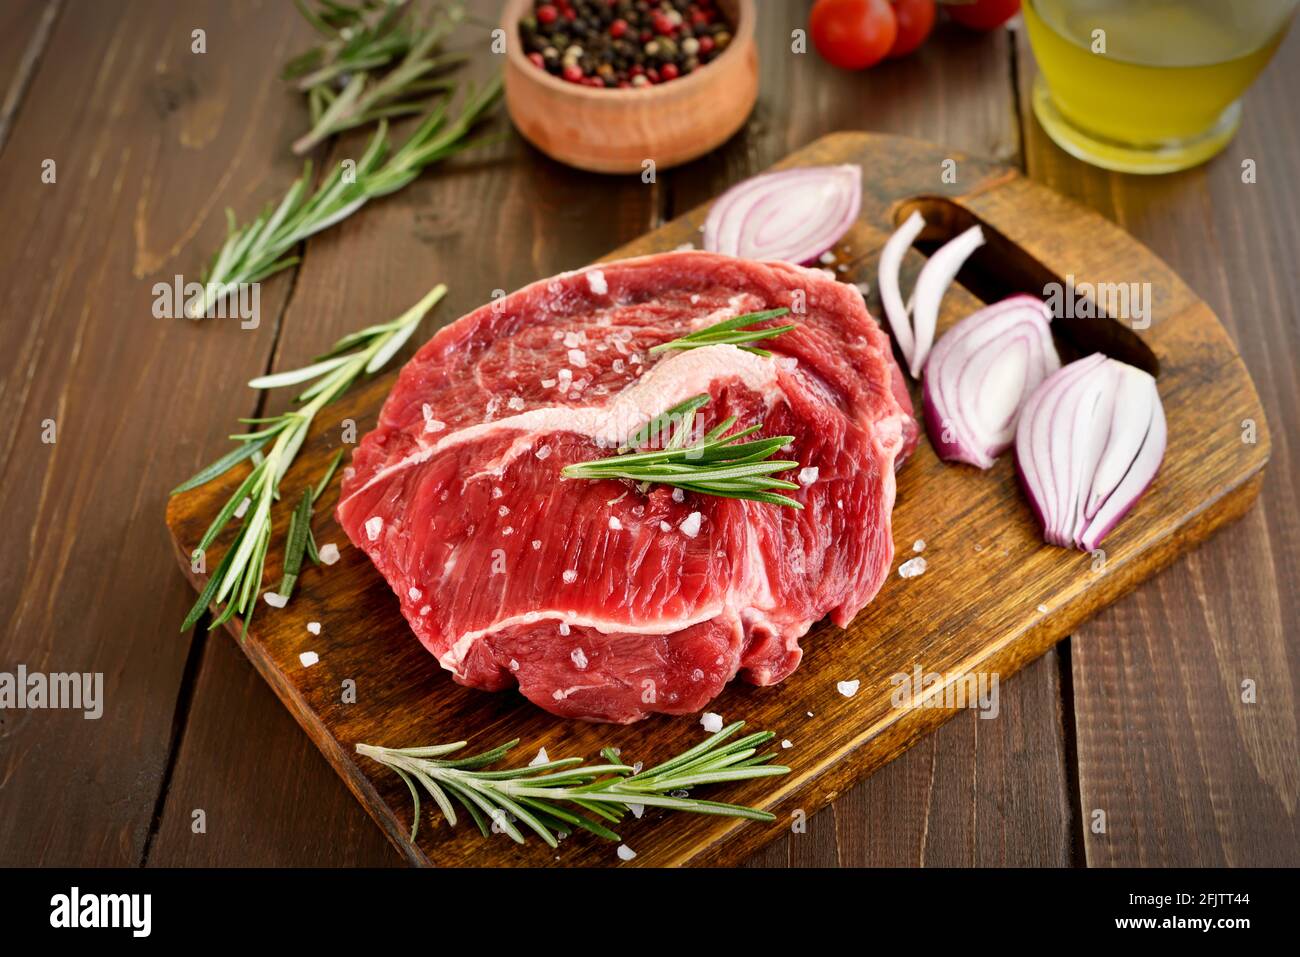 Raw beef steak on cutting board, close up view Stock Photo